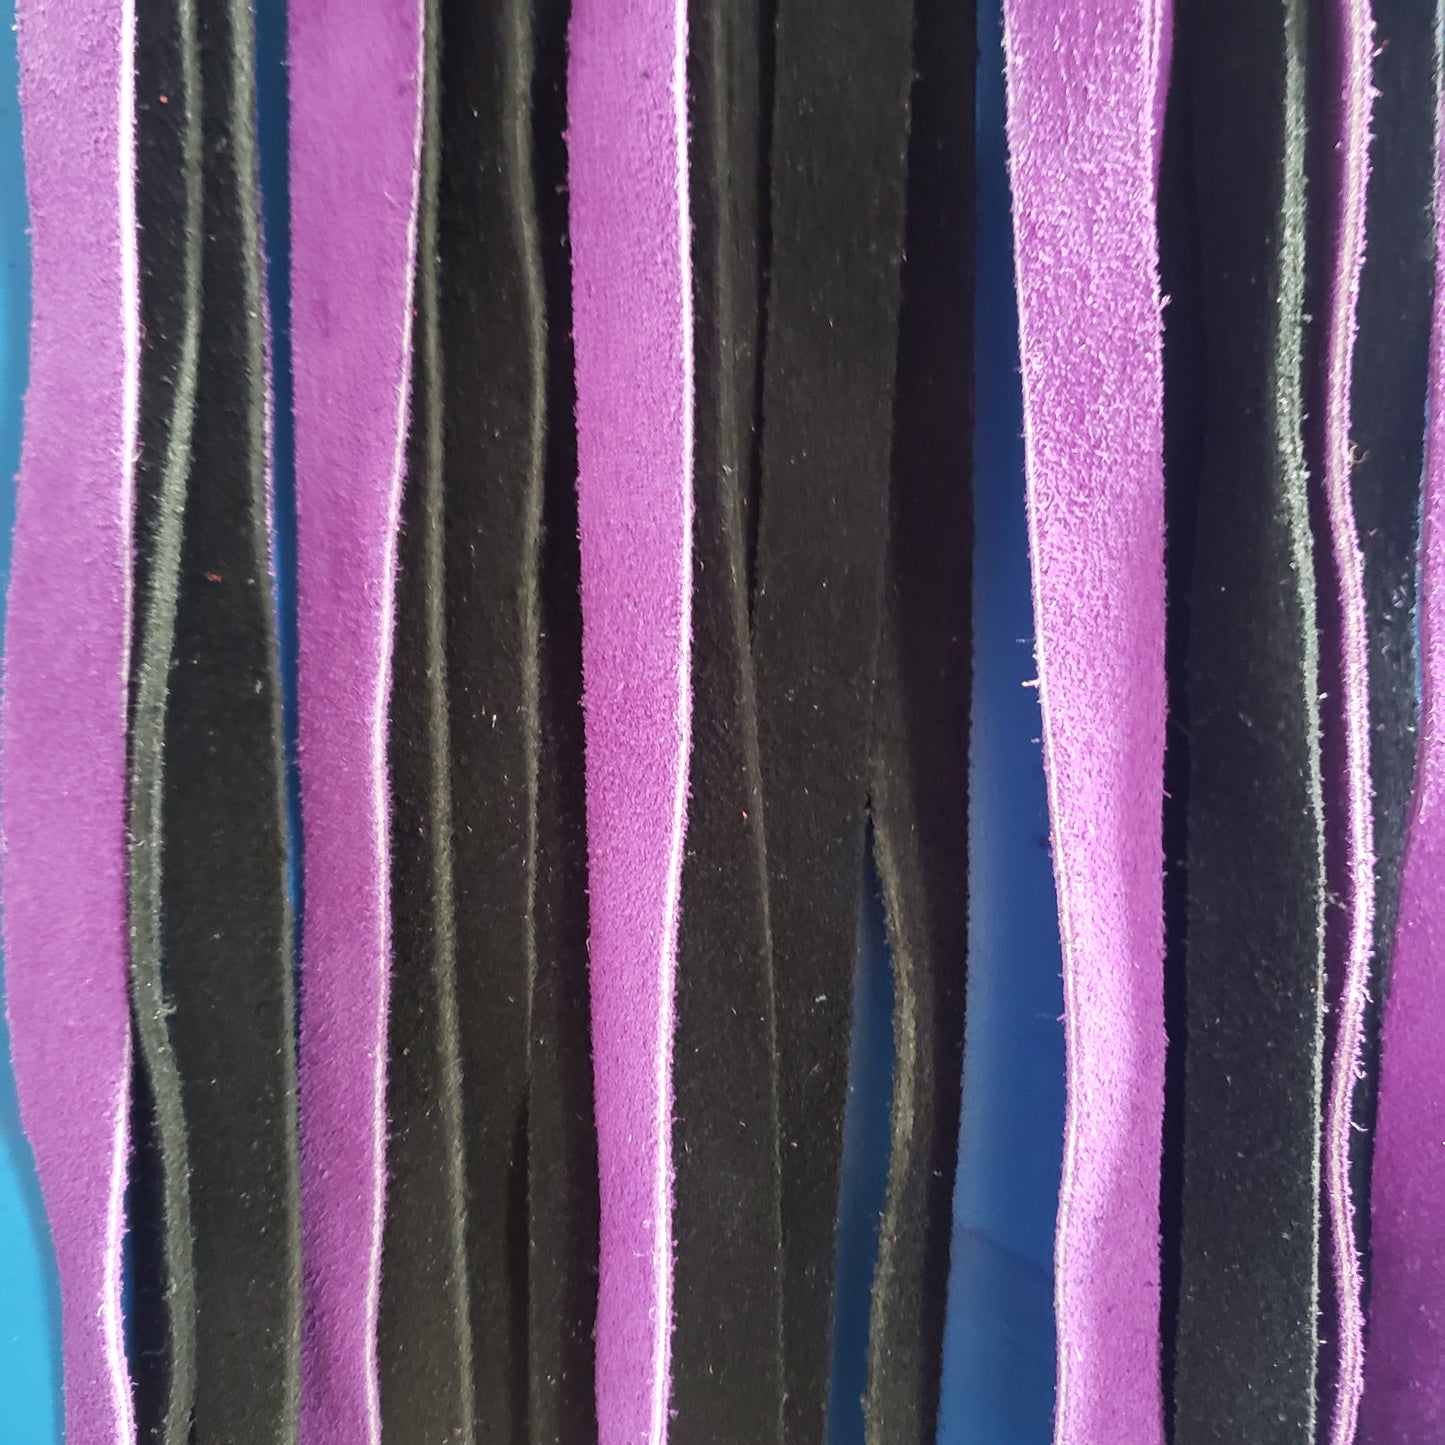 A closeup of the purple and black suede finger loop flogger.